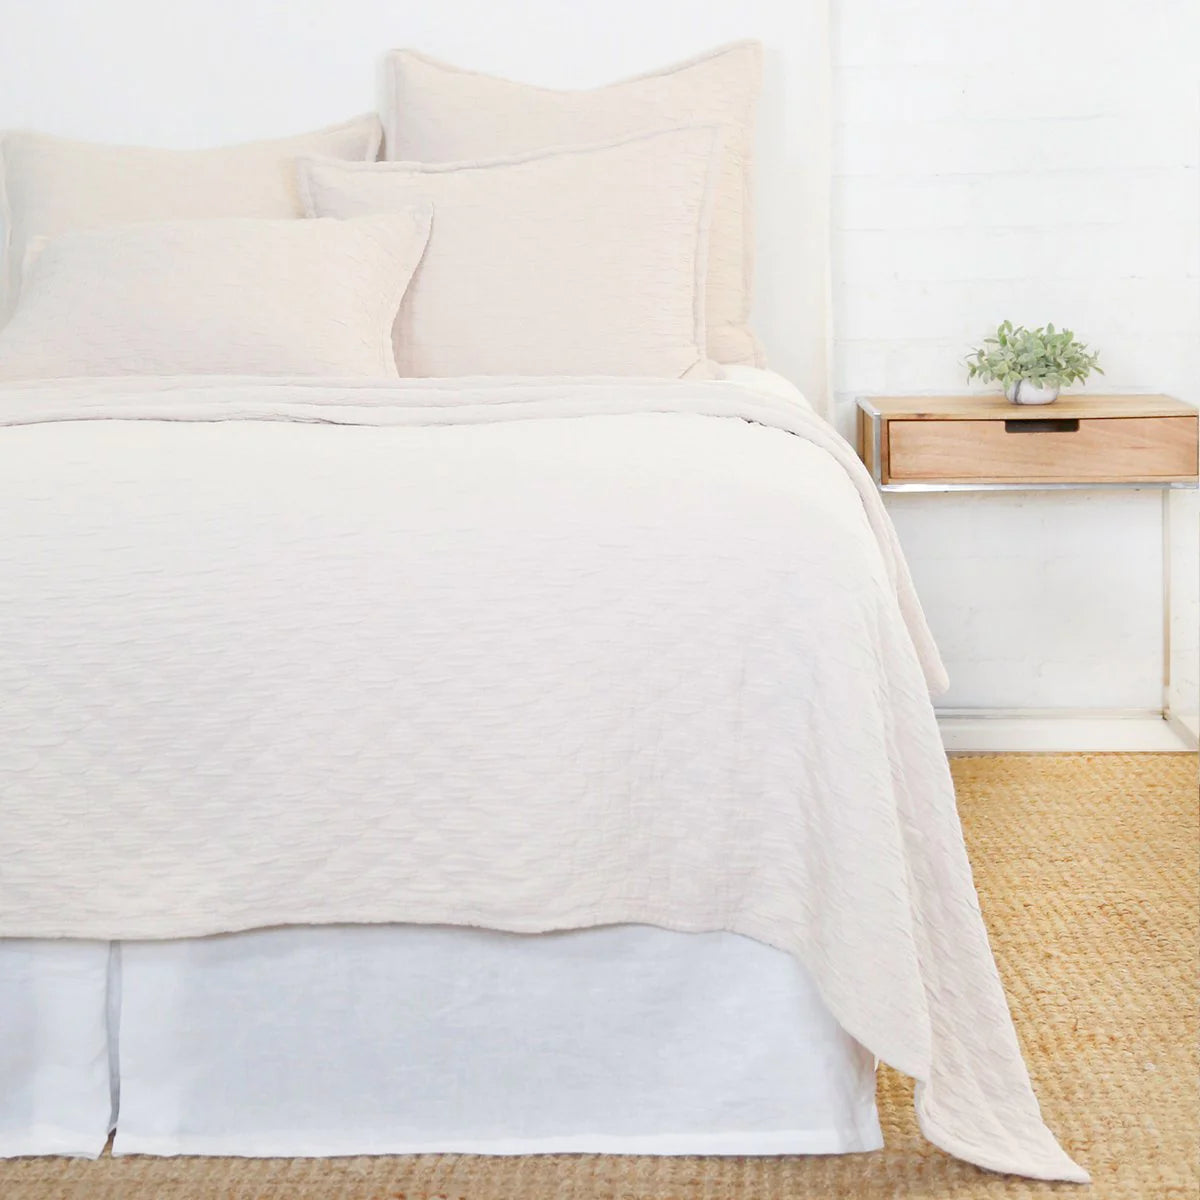 Crafted in Portugal, the Ojai matelasse by Pom Pom at Home is light and casual, bringing comfort with its subtle diamond pattern. The coziest bedding to climb into after a long day.  King lounger 100% cotton. Amethyst Home provides interior design, new home construction design consulting, vintage area rugs, and lighting in the Des Moines metro area.